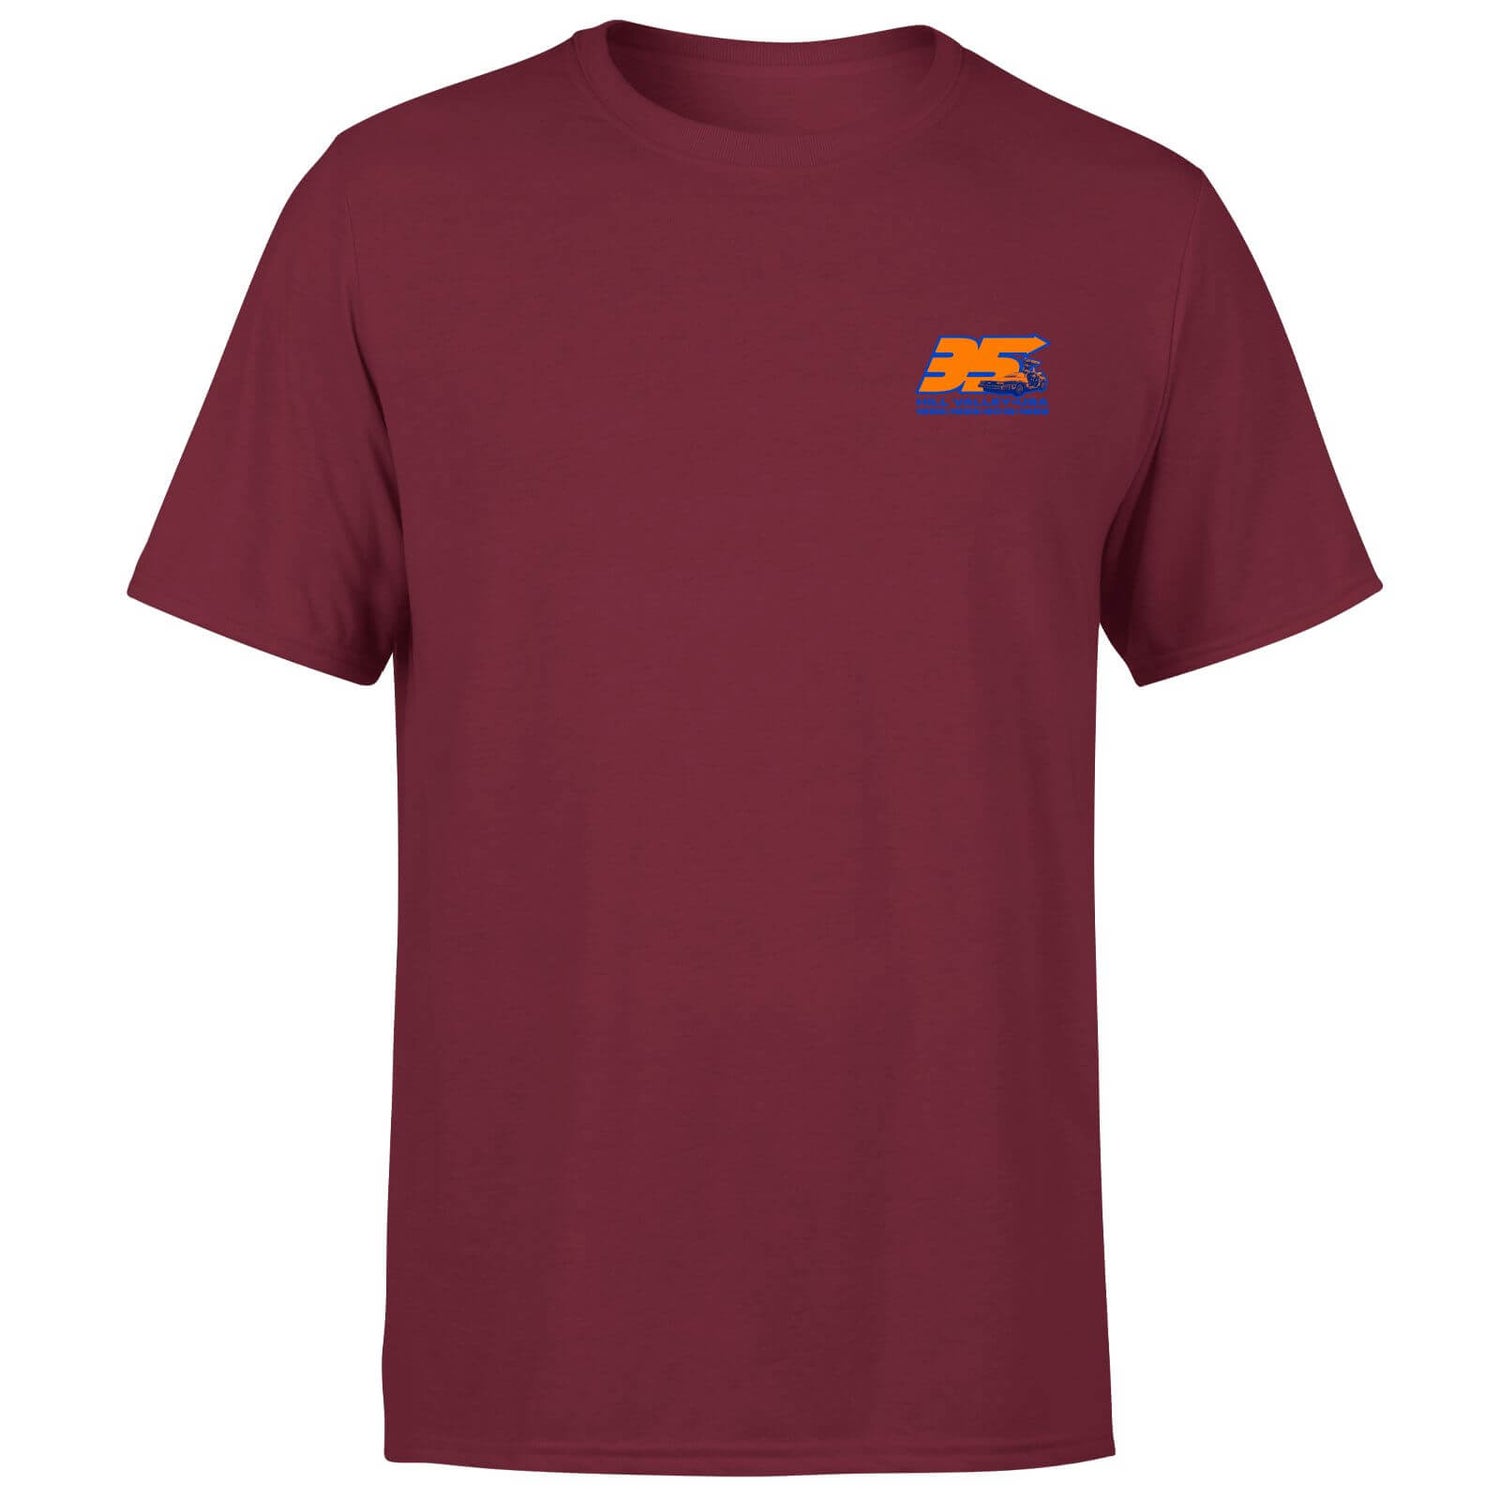 Back To The Future 35 Hill Valley Front Men's T-Shirt - Burgundy